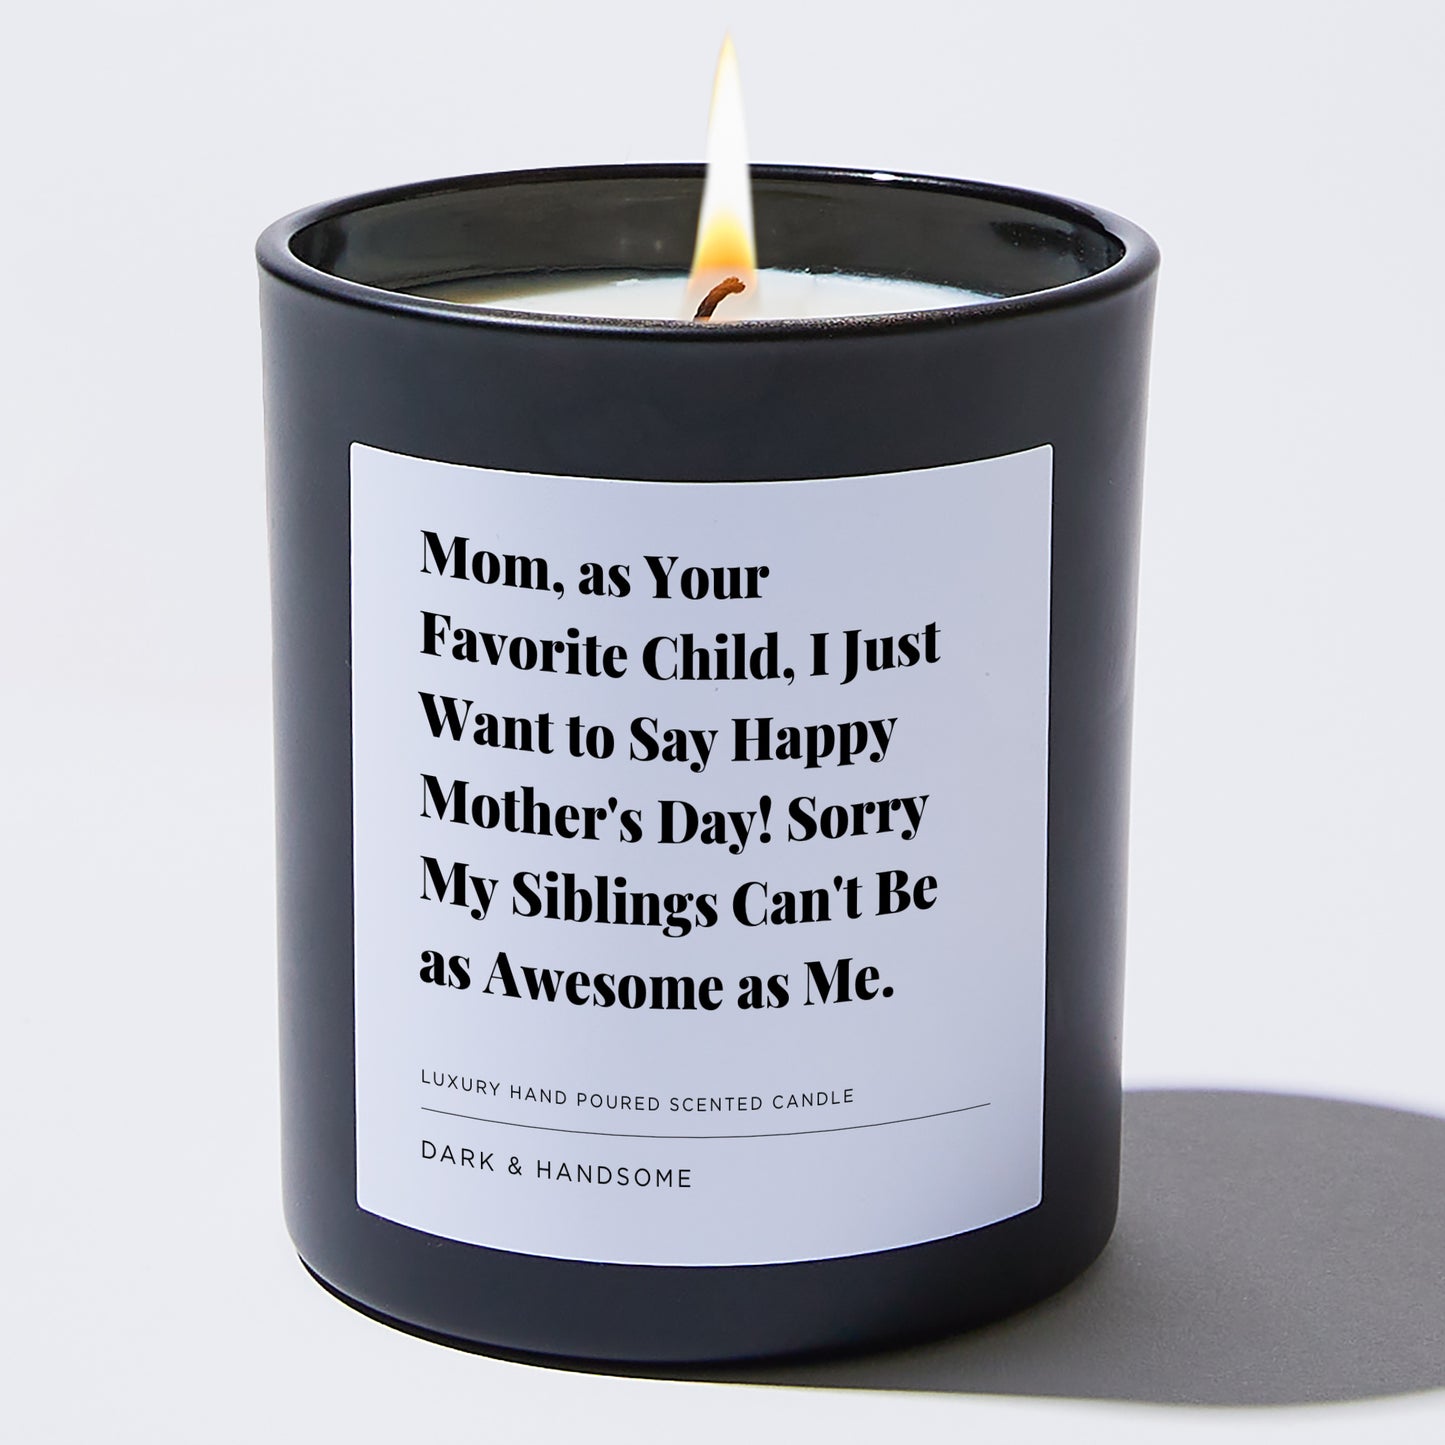 Gift for Mom - Mom, as your favorite child, I just want to say Happy Mother's Day! Sorry my siblings can't be as awesome as me. - Candle